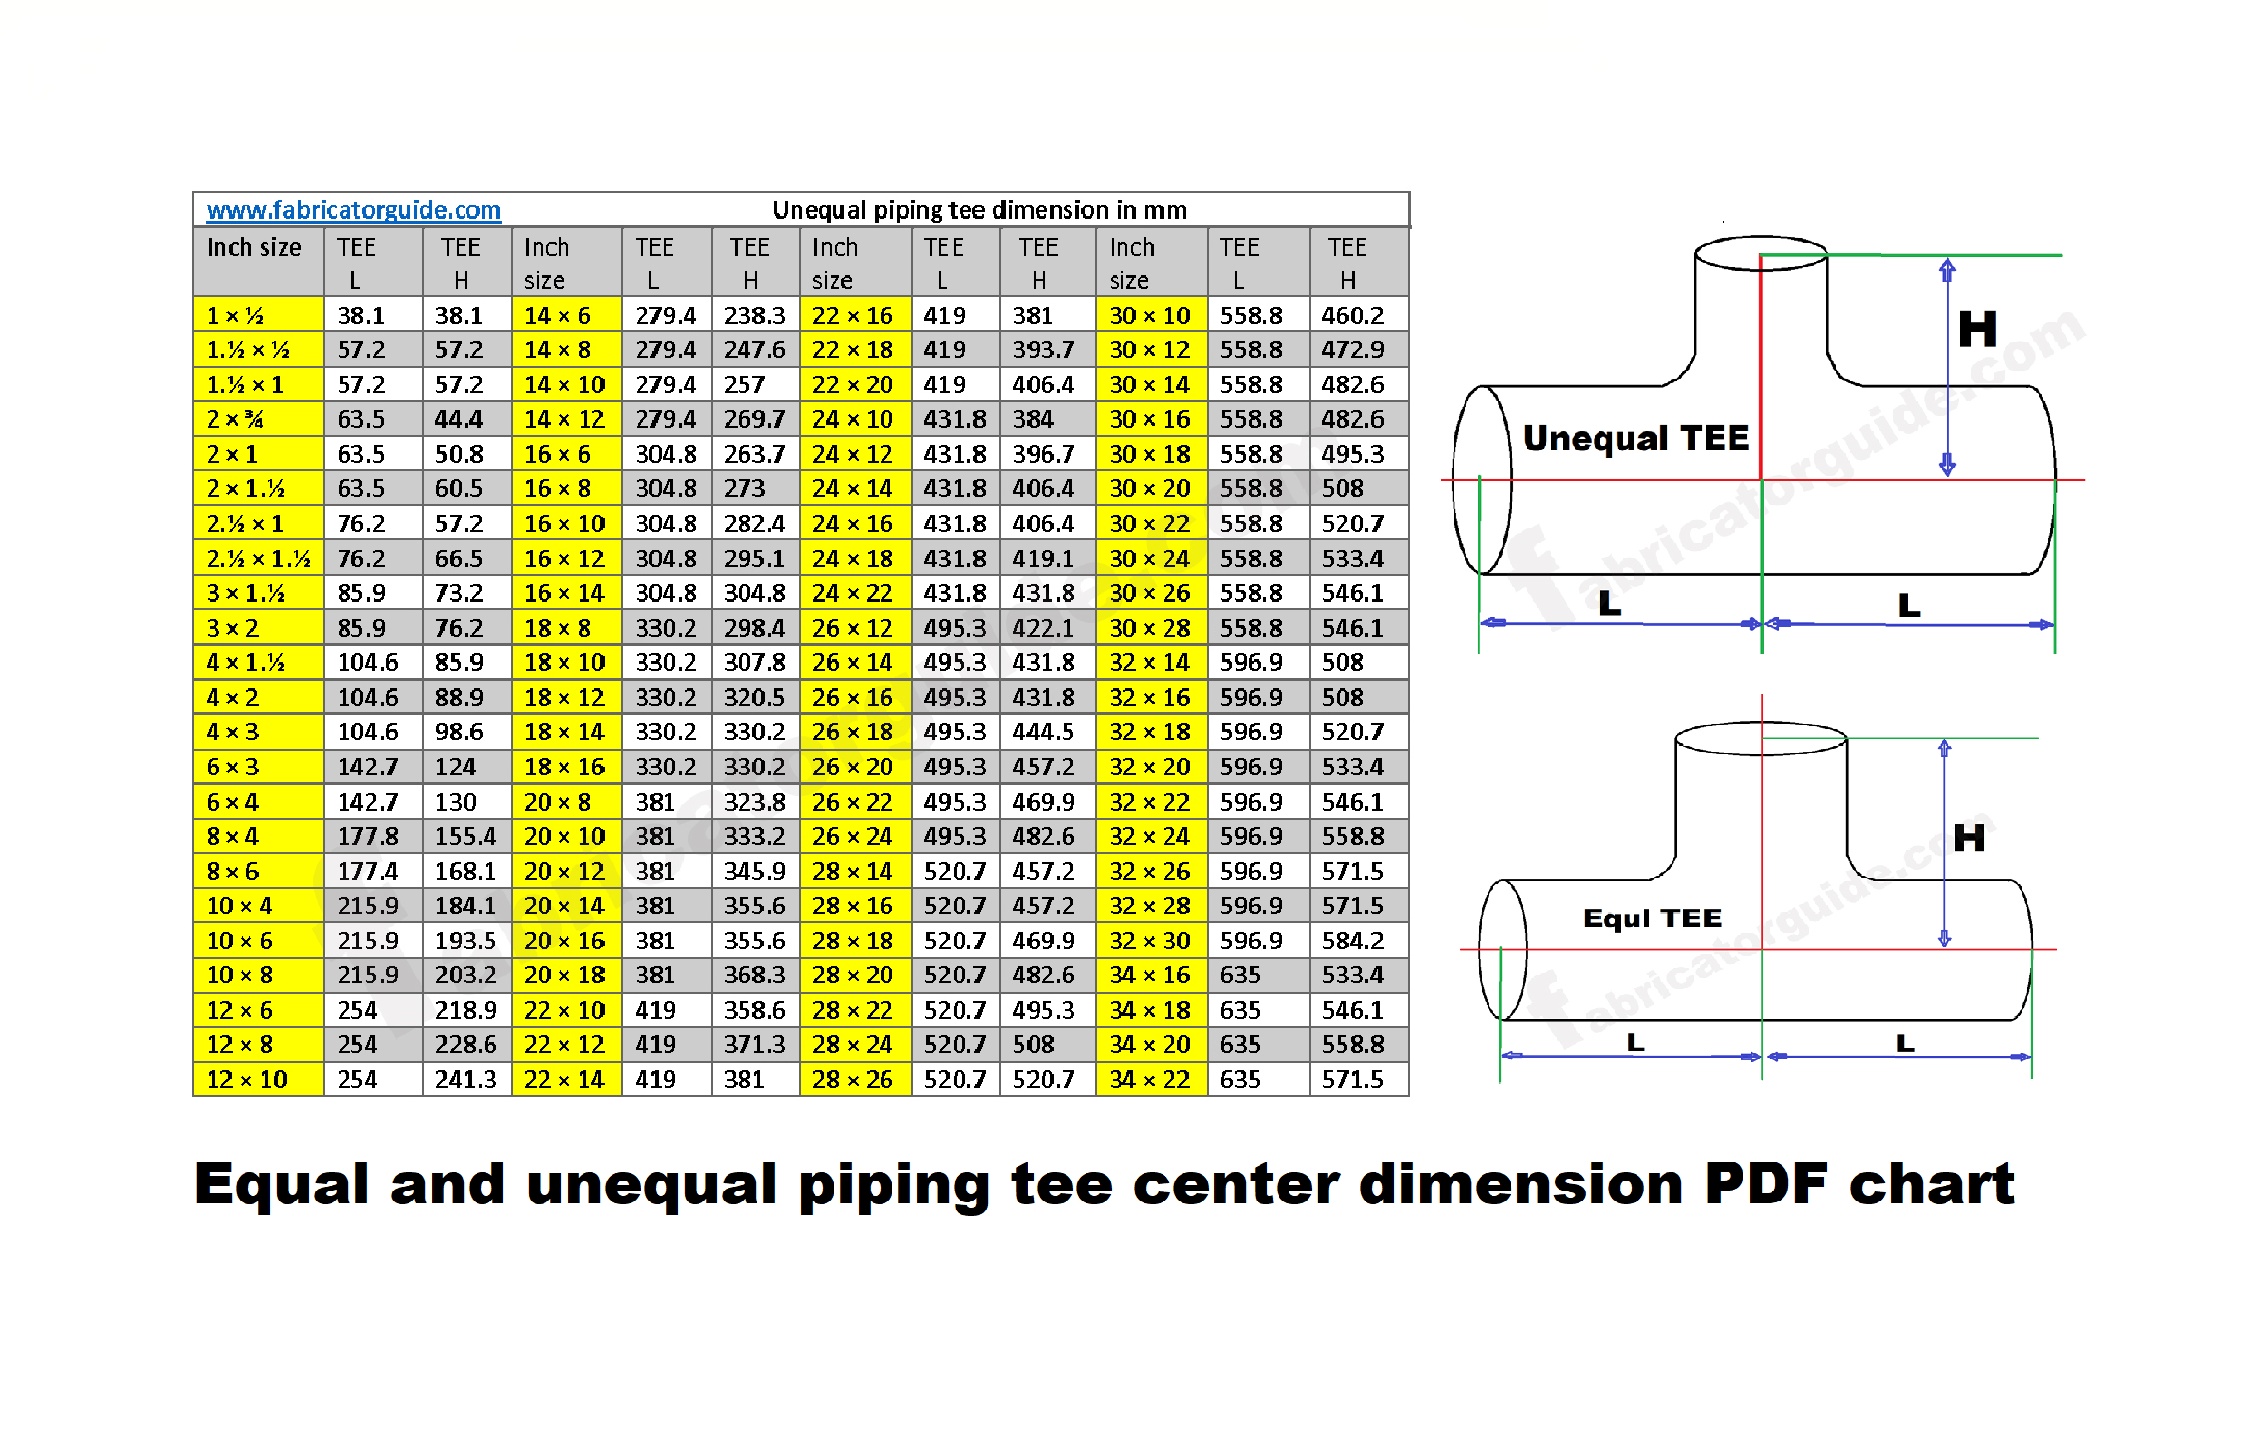 piping tee fittings dimension chart Piping Equal Tee and unequal Tee